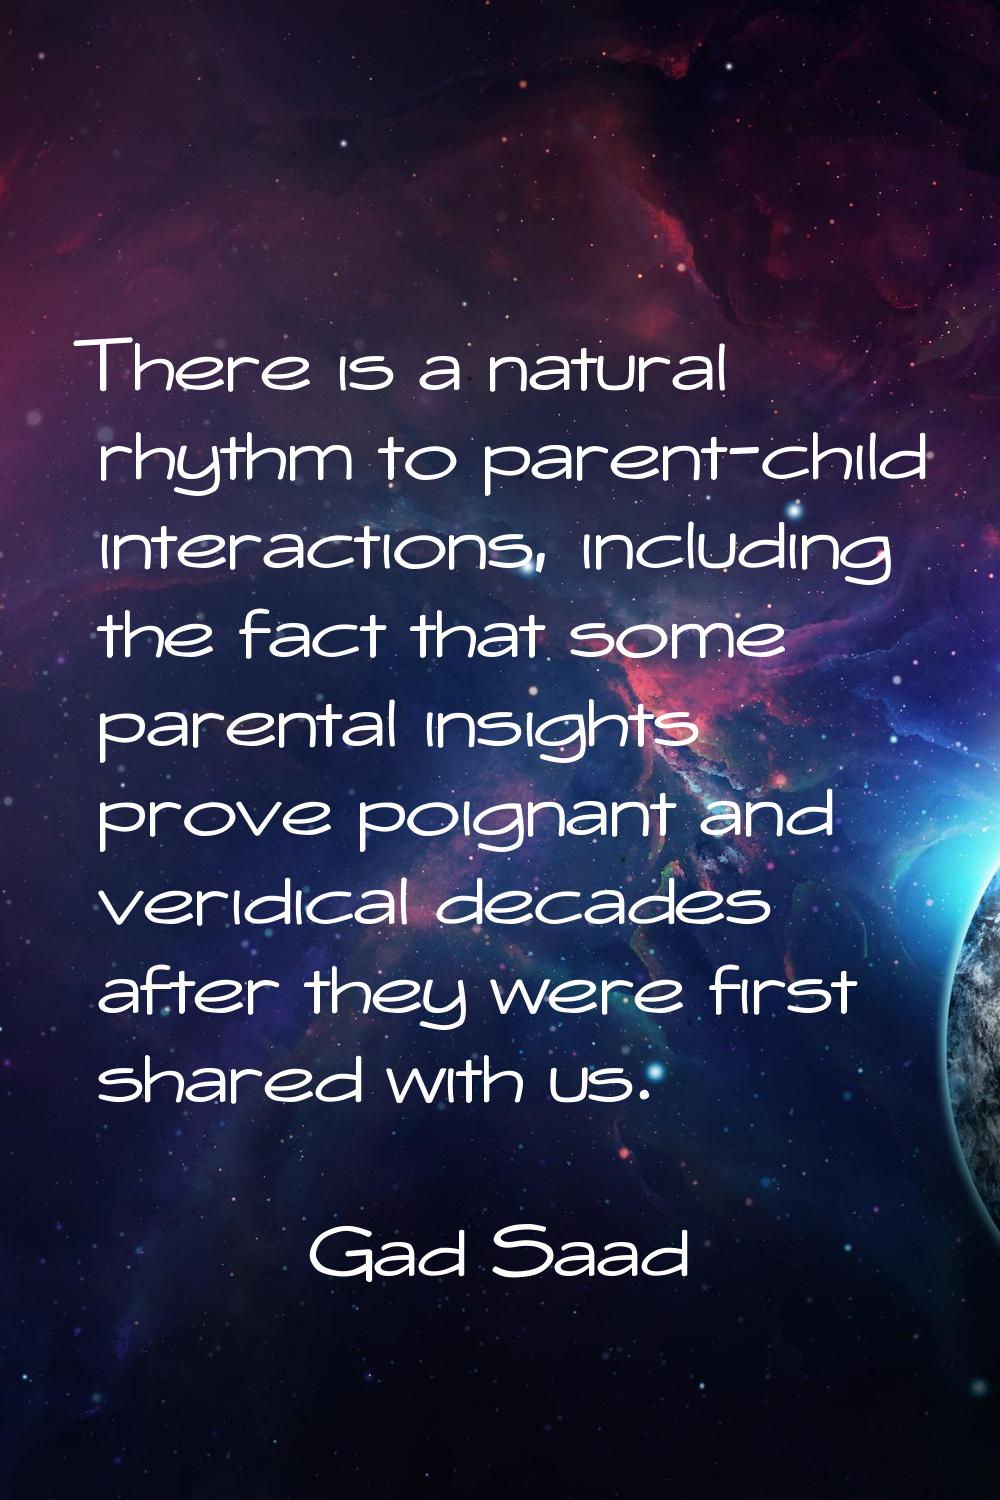 There is a natural rhythm to parent-child interactions, including the fact that some parental insig